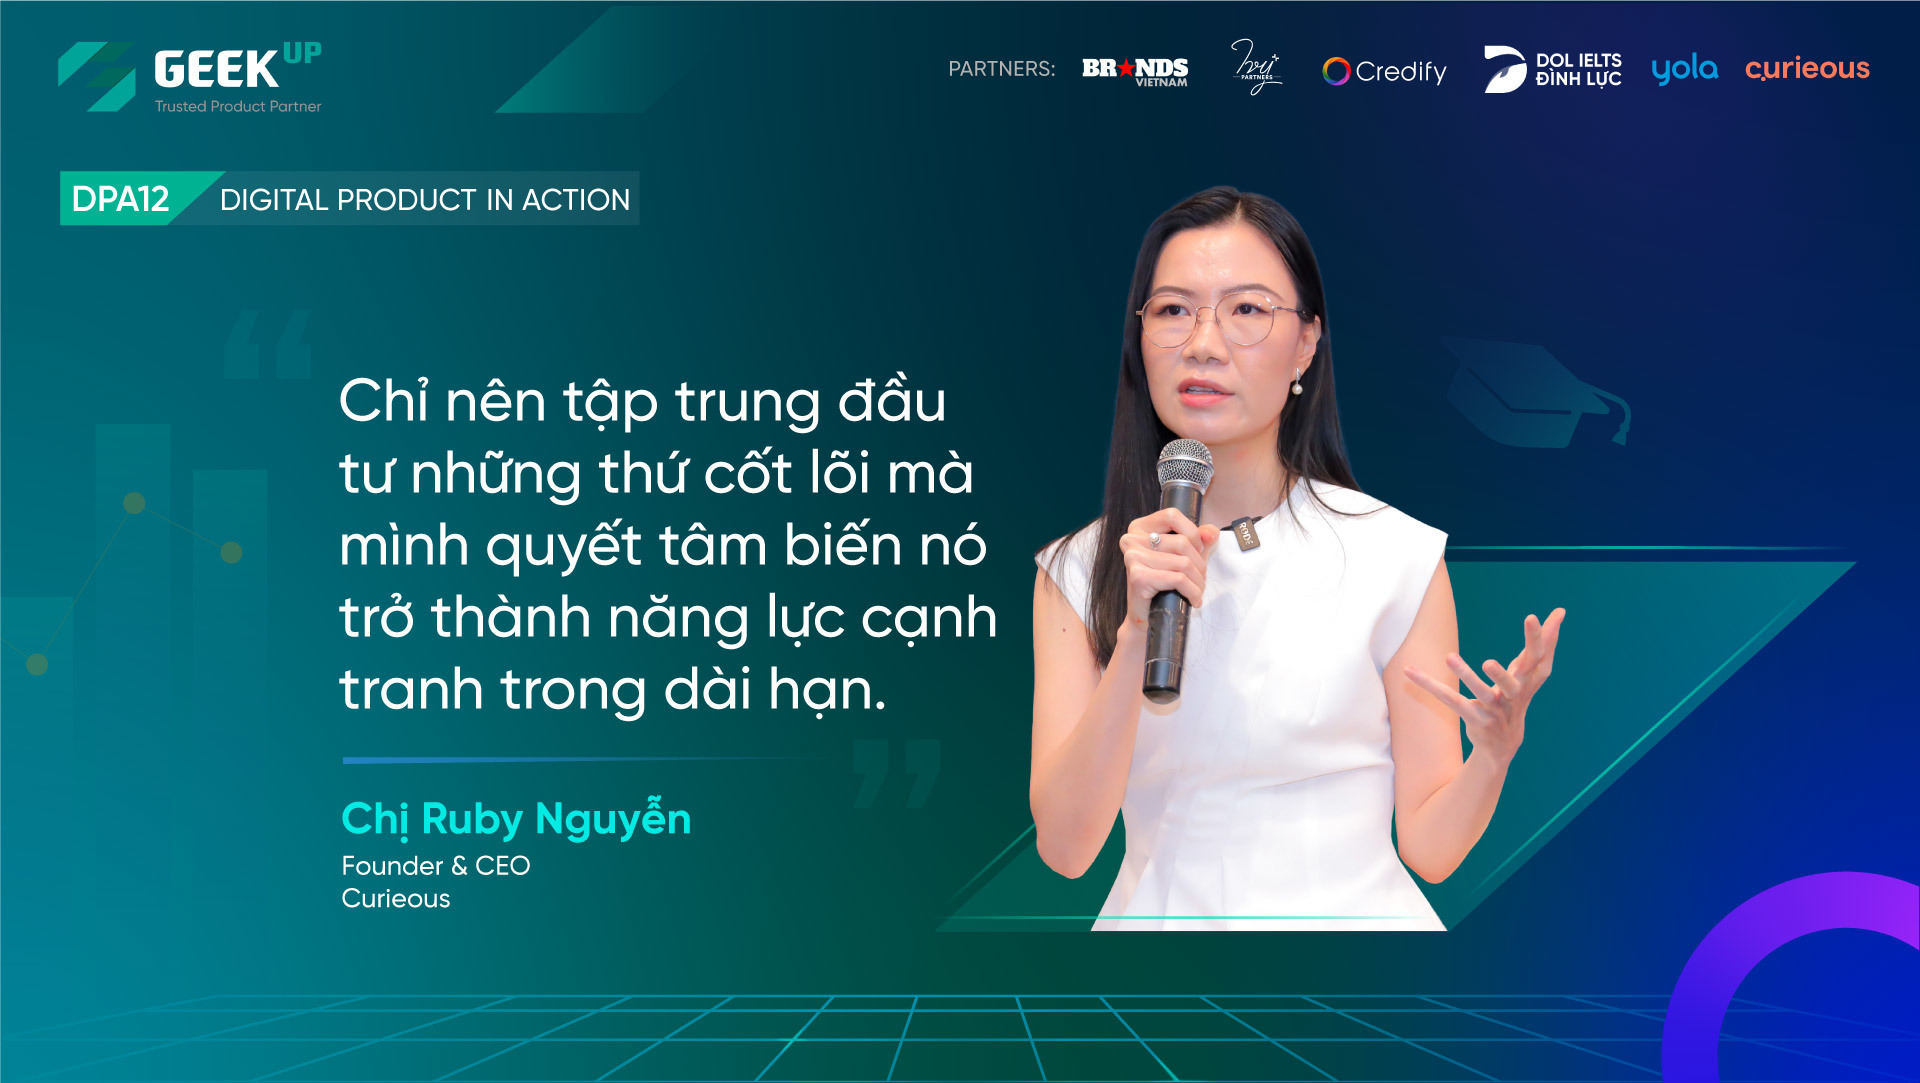 Chị Ruby Nguyễn, Founder & CEO – Curieous